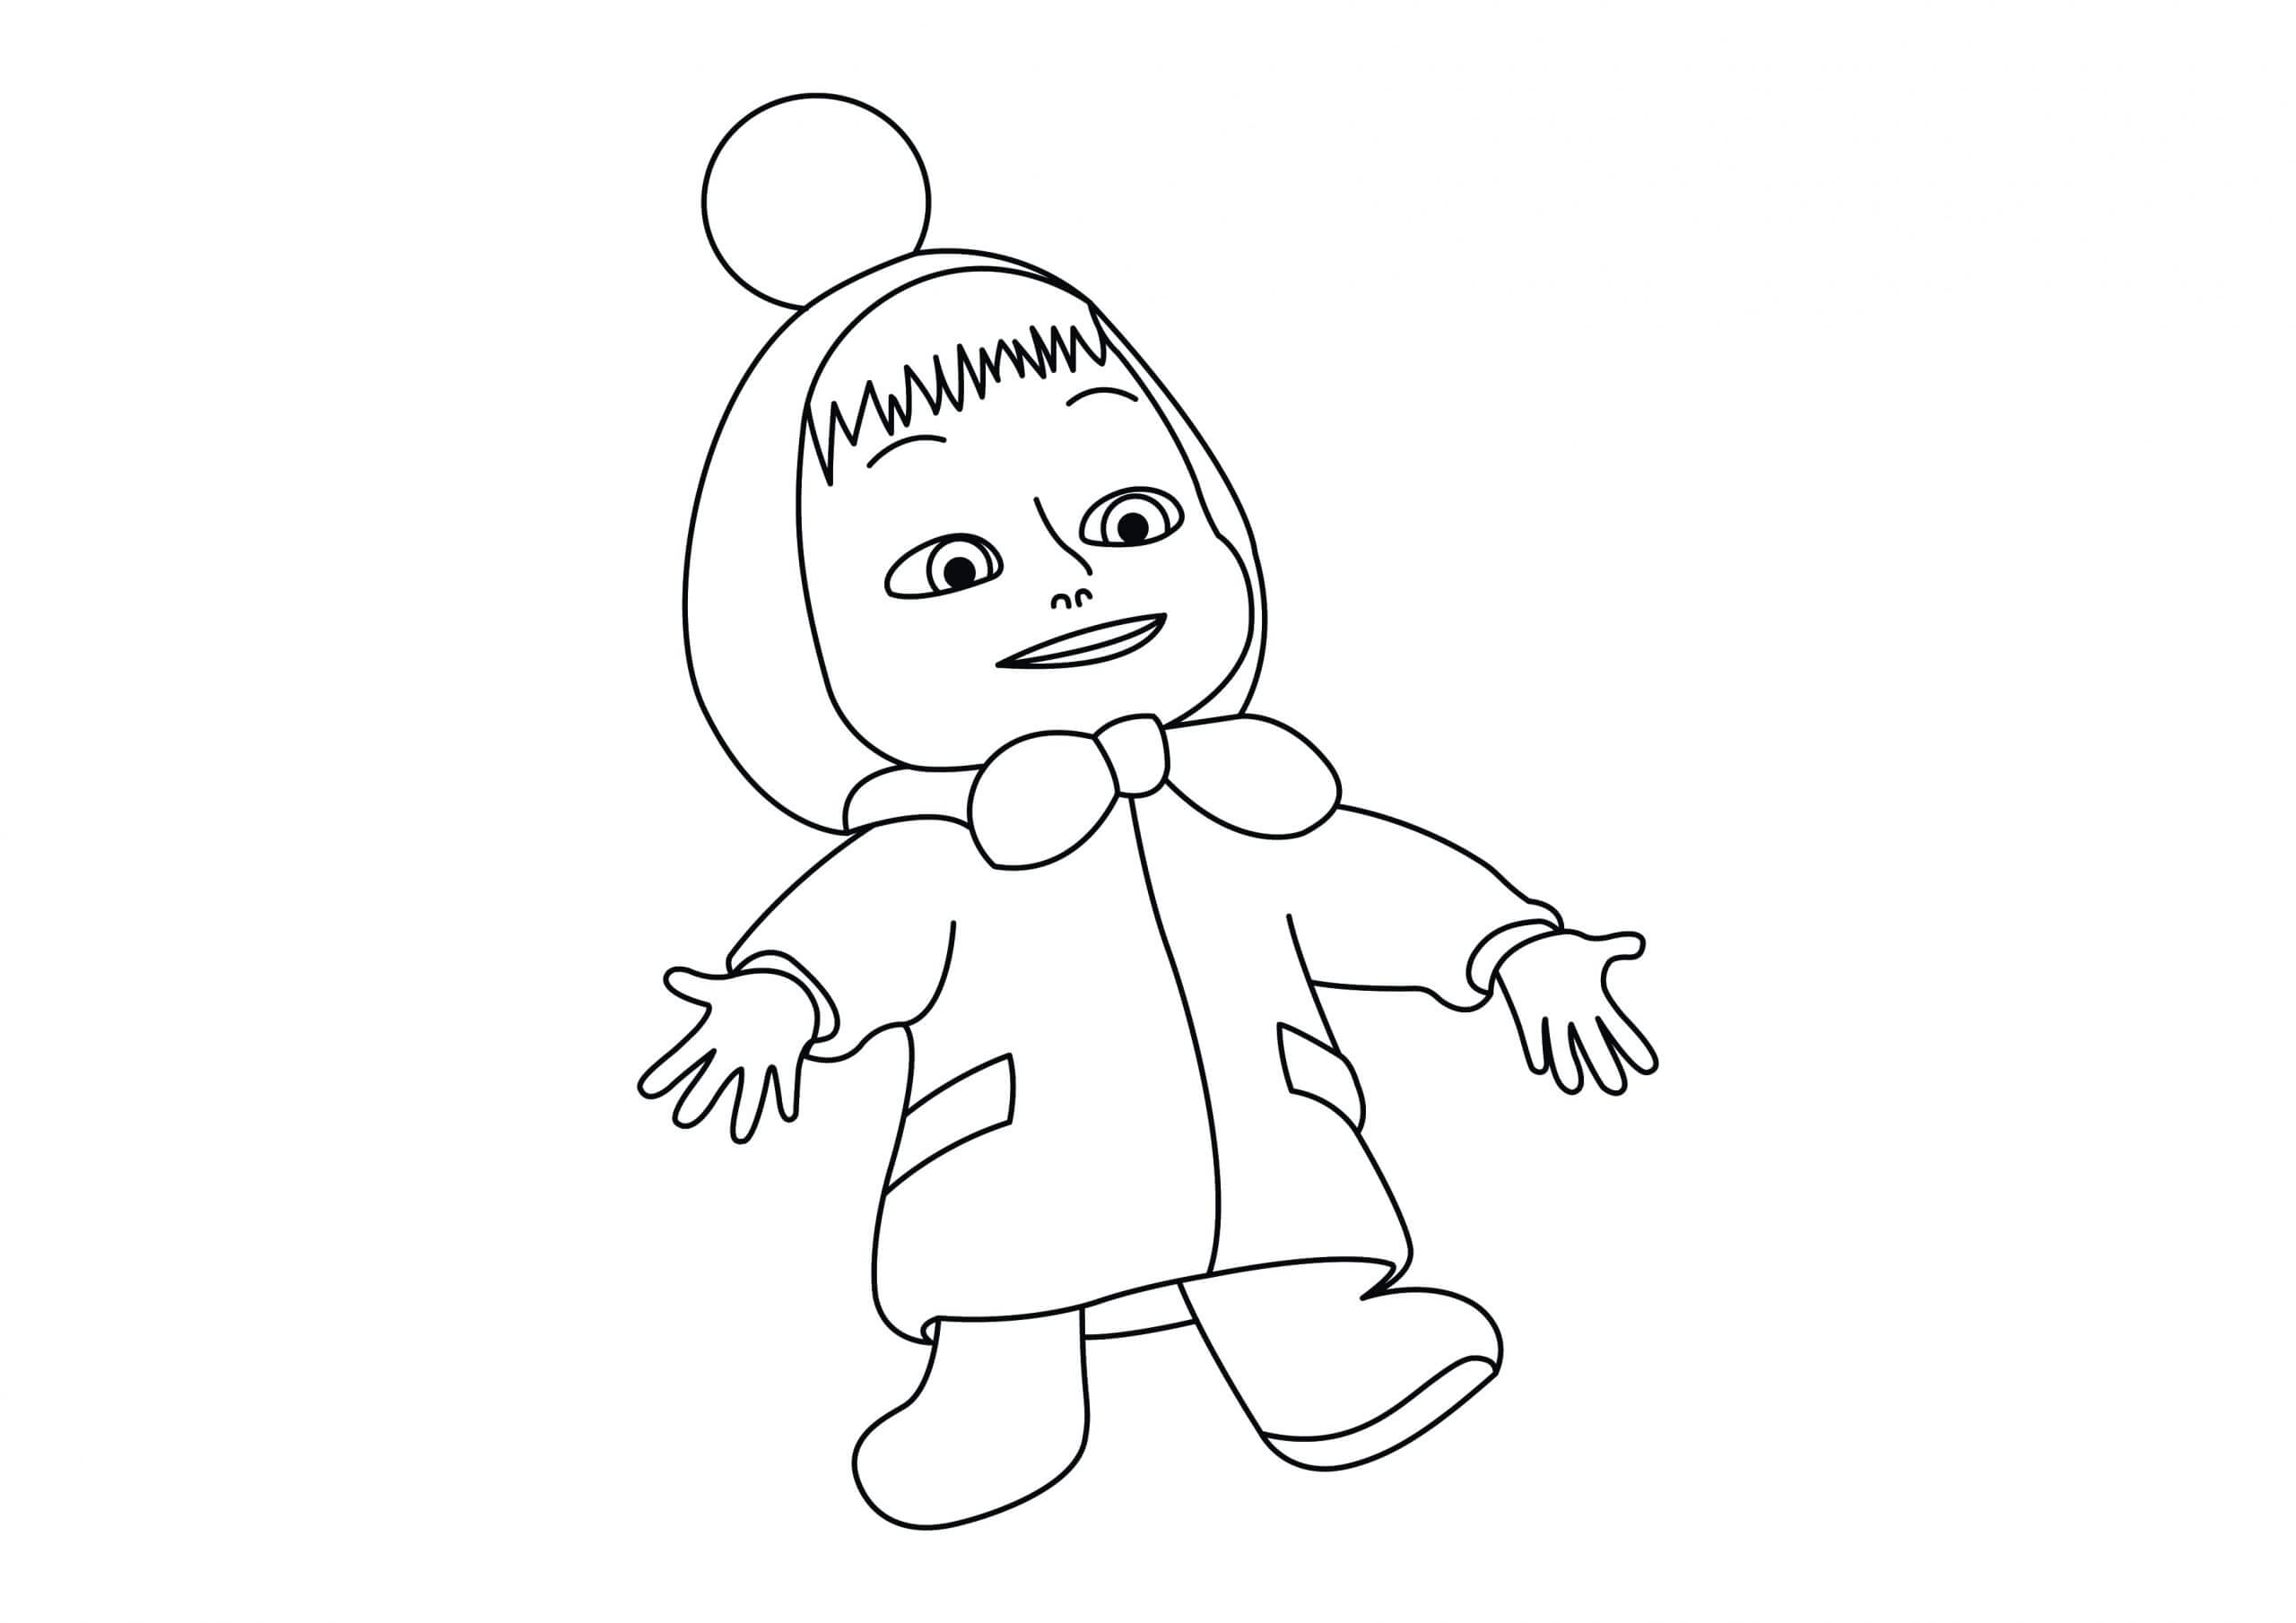 Masha 5 Coloring Page - Free Printable Coloring Pages for Kids